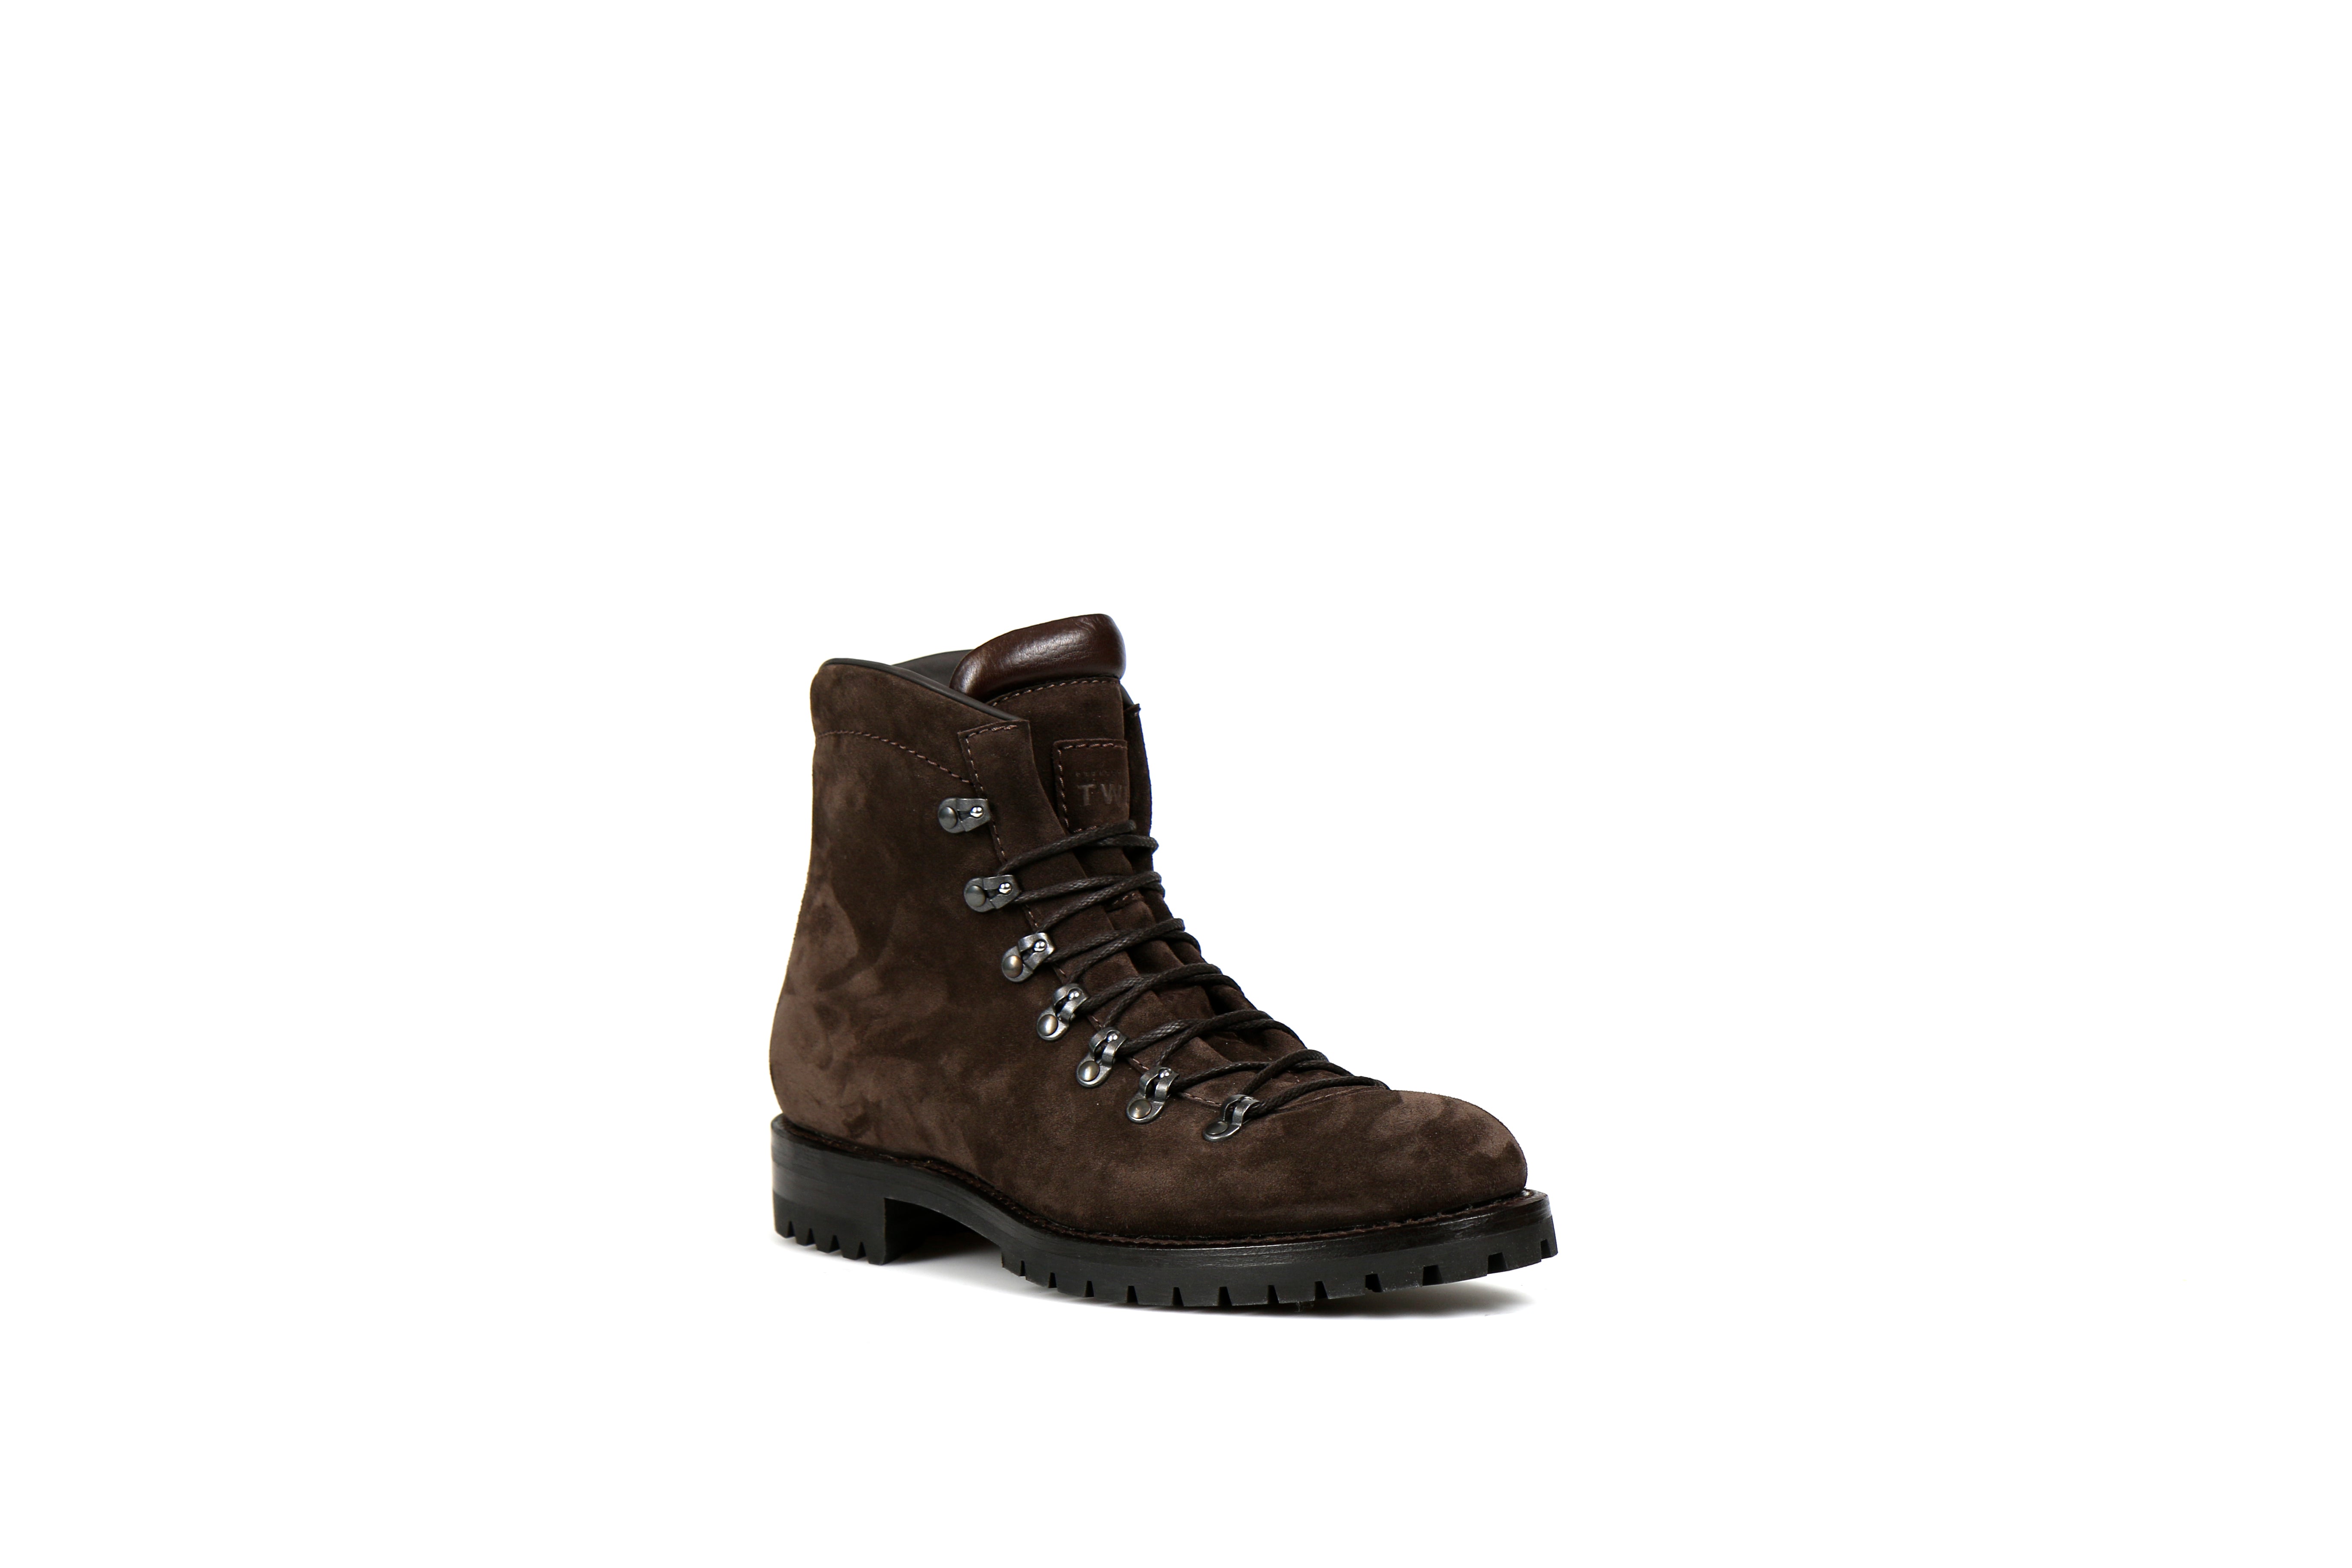 Kings Coffee Suede Leather Hiking Boots